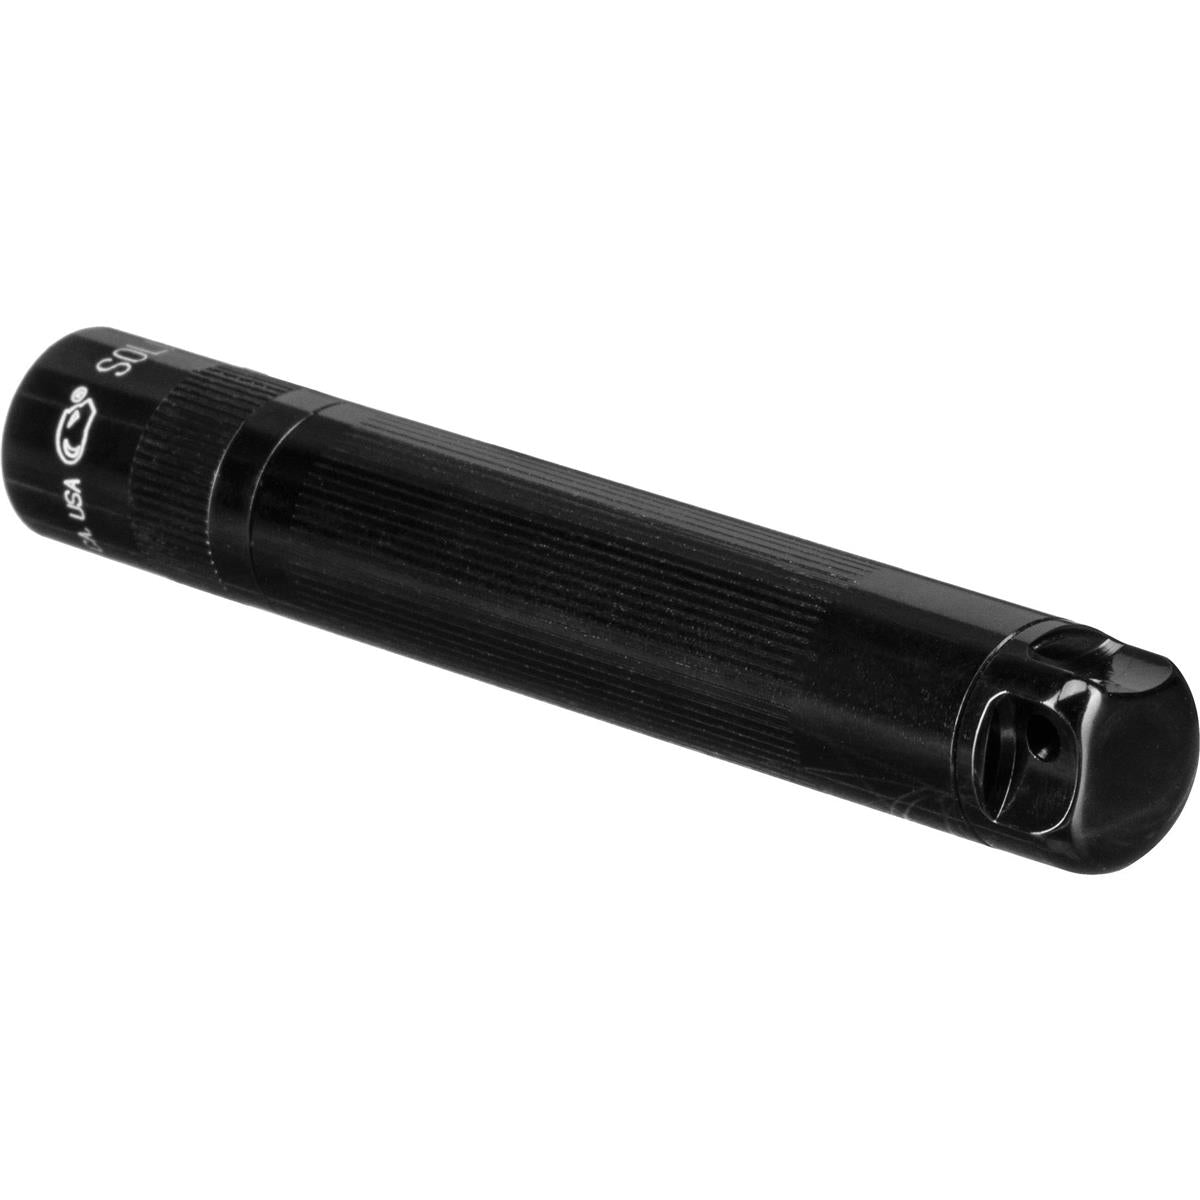 Maglite Solitaire Incandescent 1-Cell AAA Flashlight in Presentation Box #K3A012